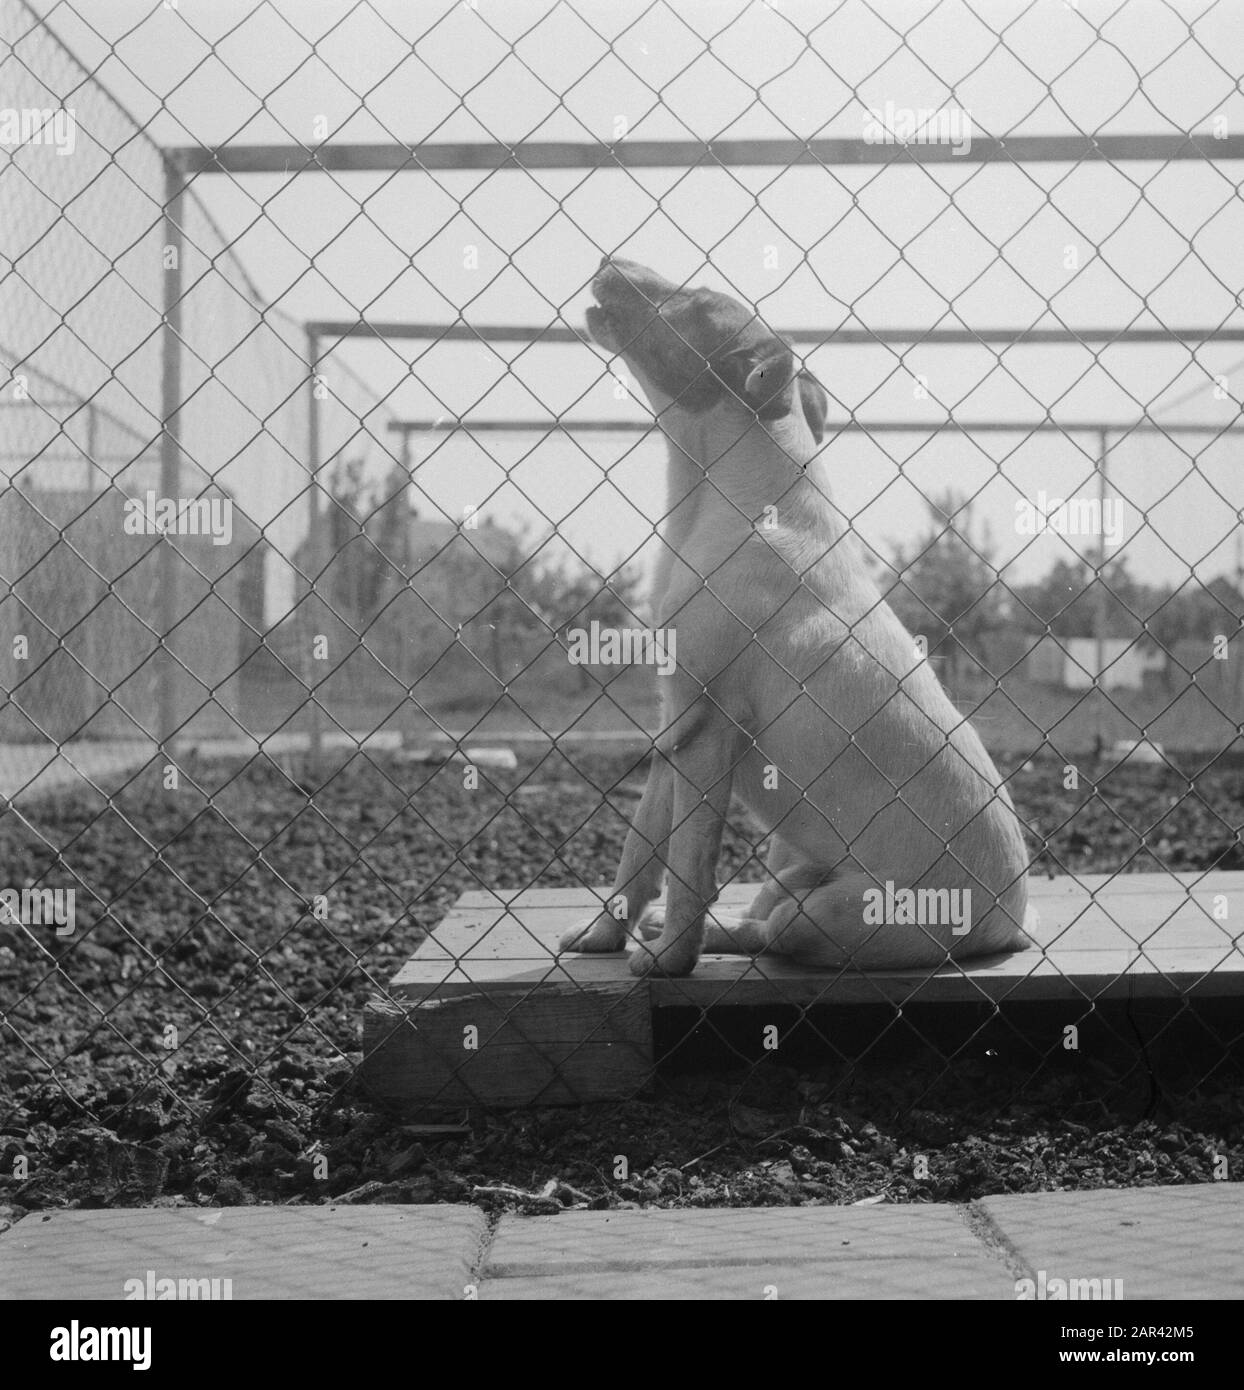 Dog pension Duivendrecht Date: May 22, 1949 Location: Pigeon law Keywords: Dog Guesthouses Stock Photo